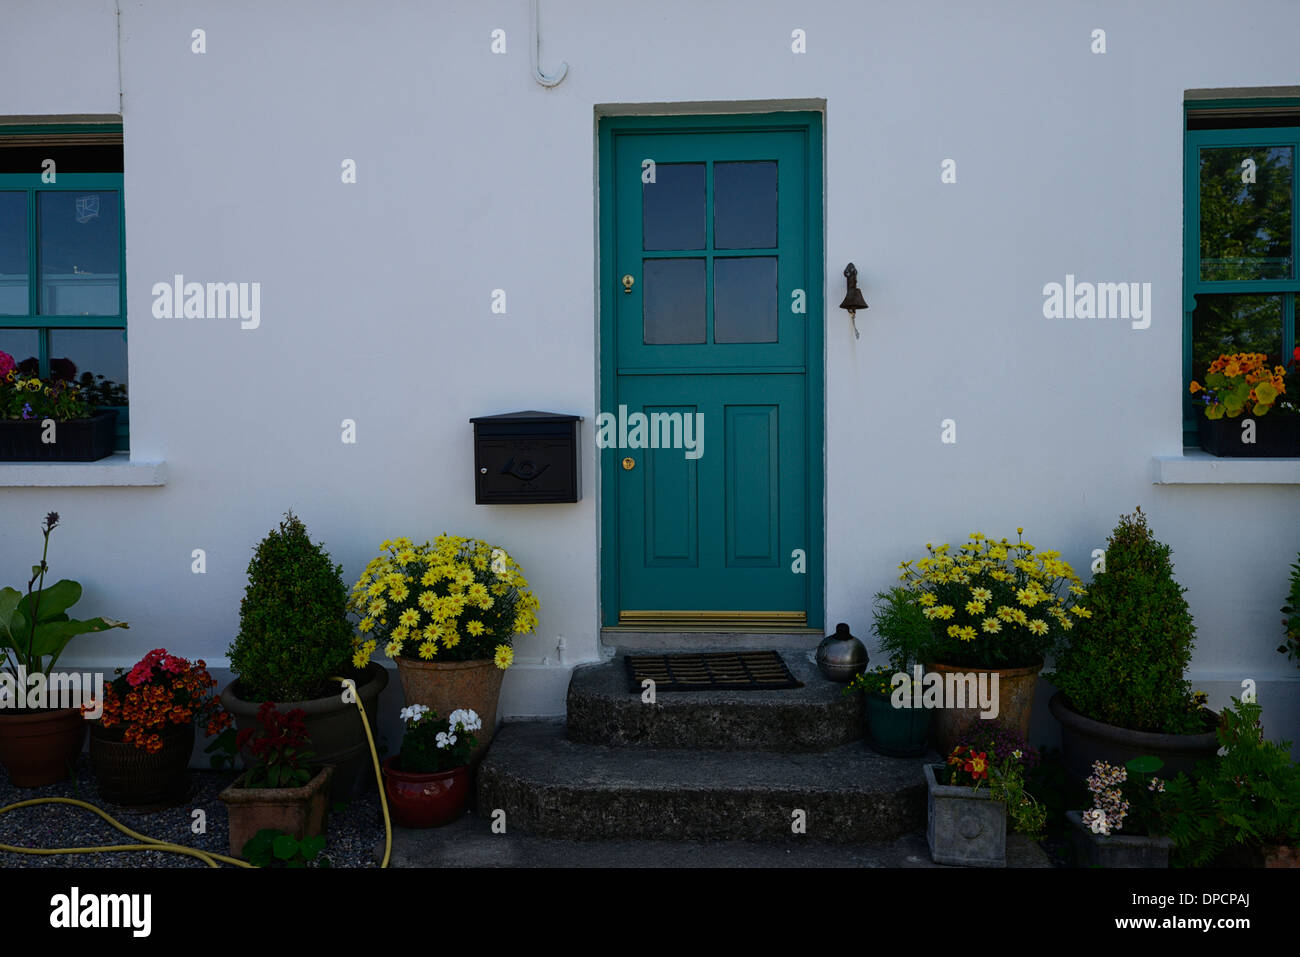 house building front ardmore village waterford ireland summer tidy neat town Stock Photo